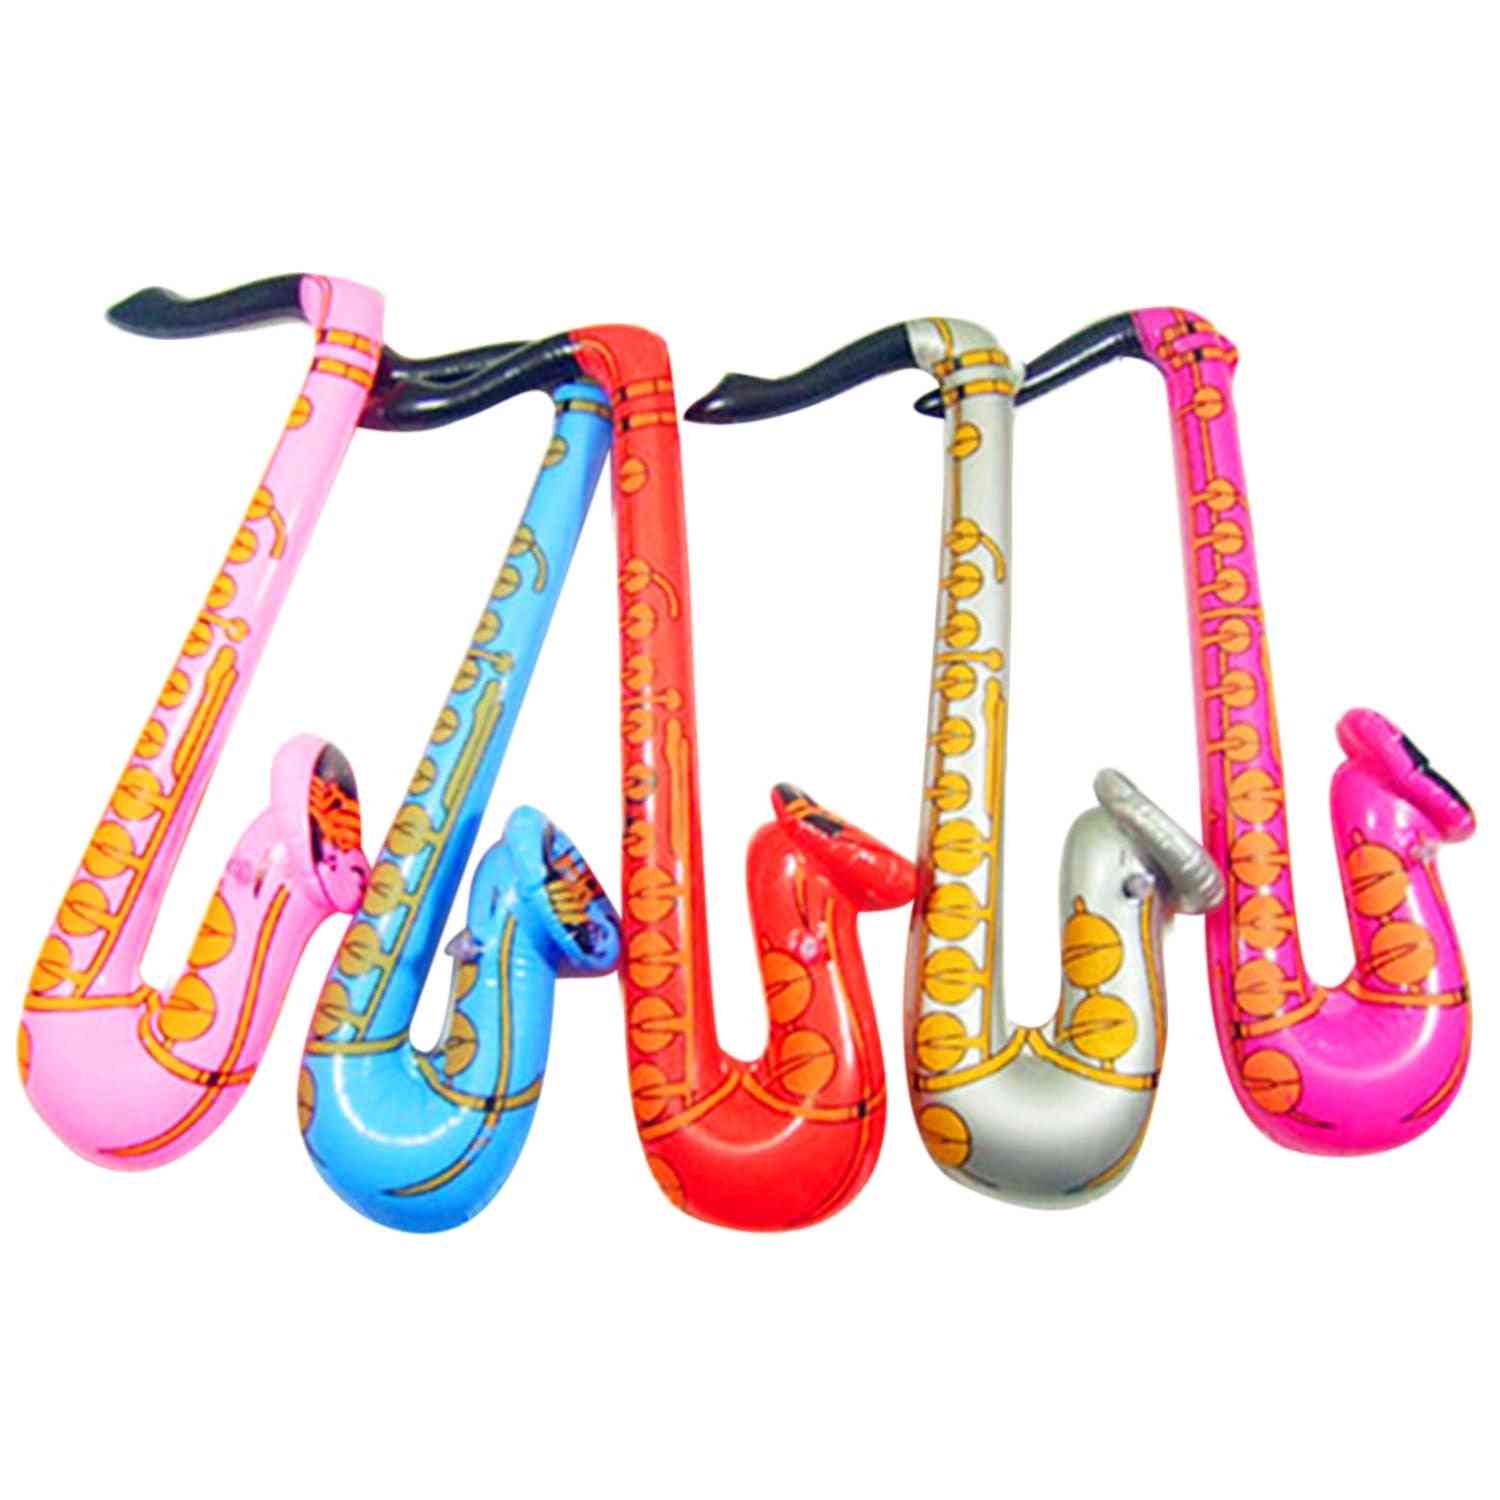 Inflatables Guitar Saxophone Microphone Balloons Musical Instruments Toy